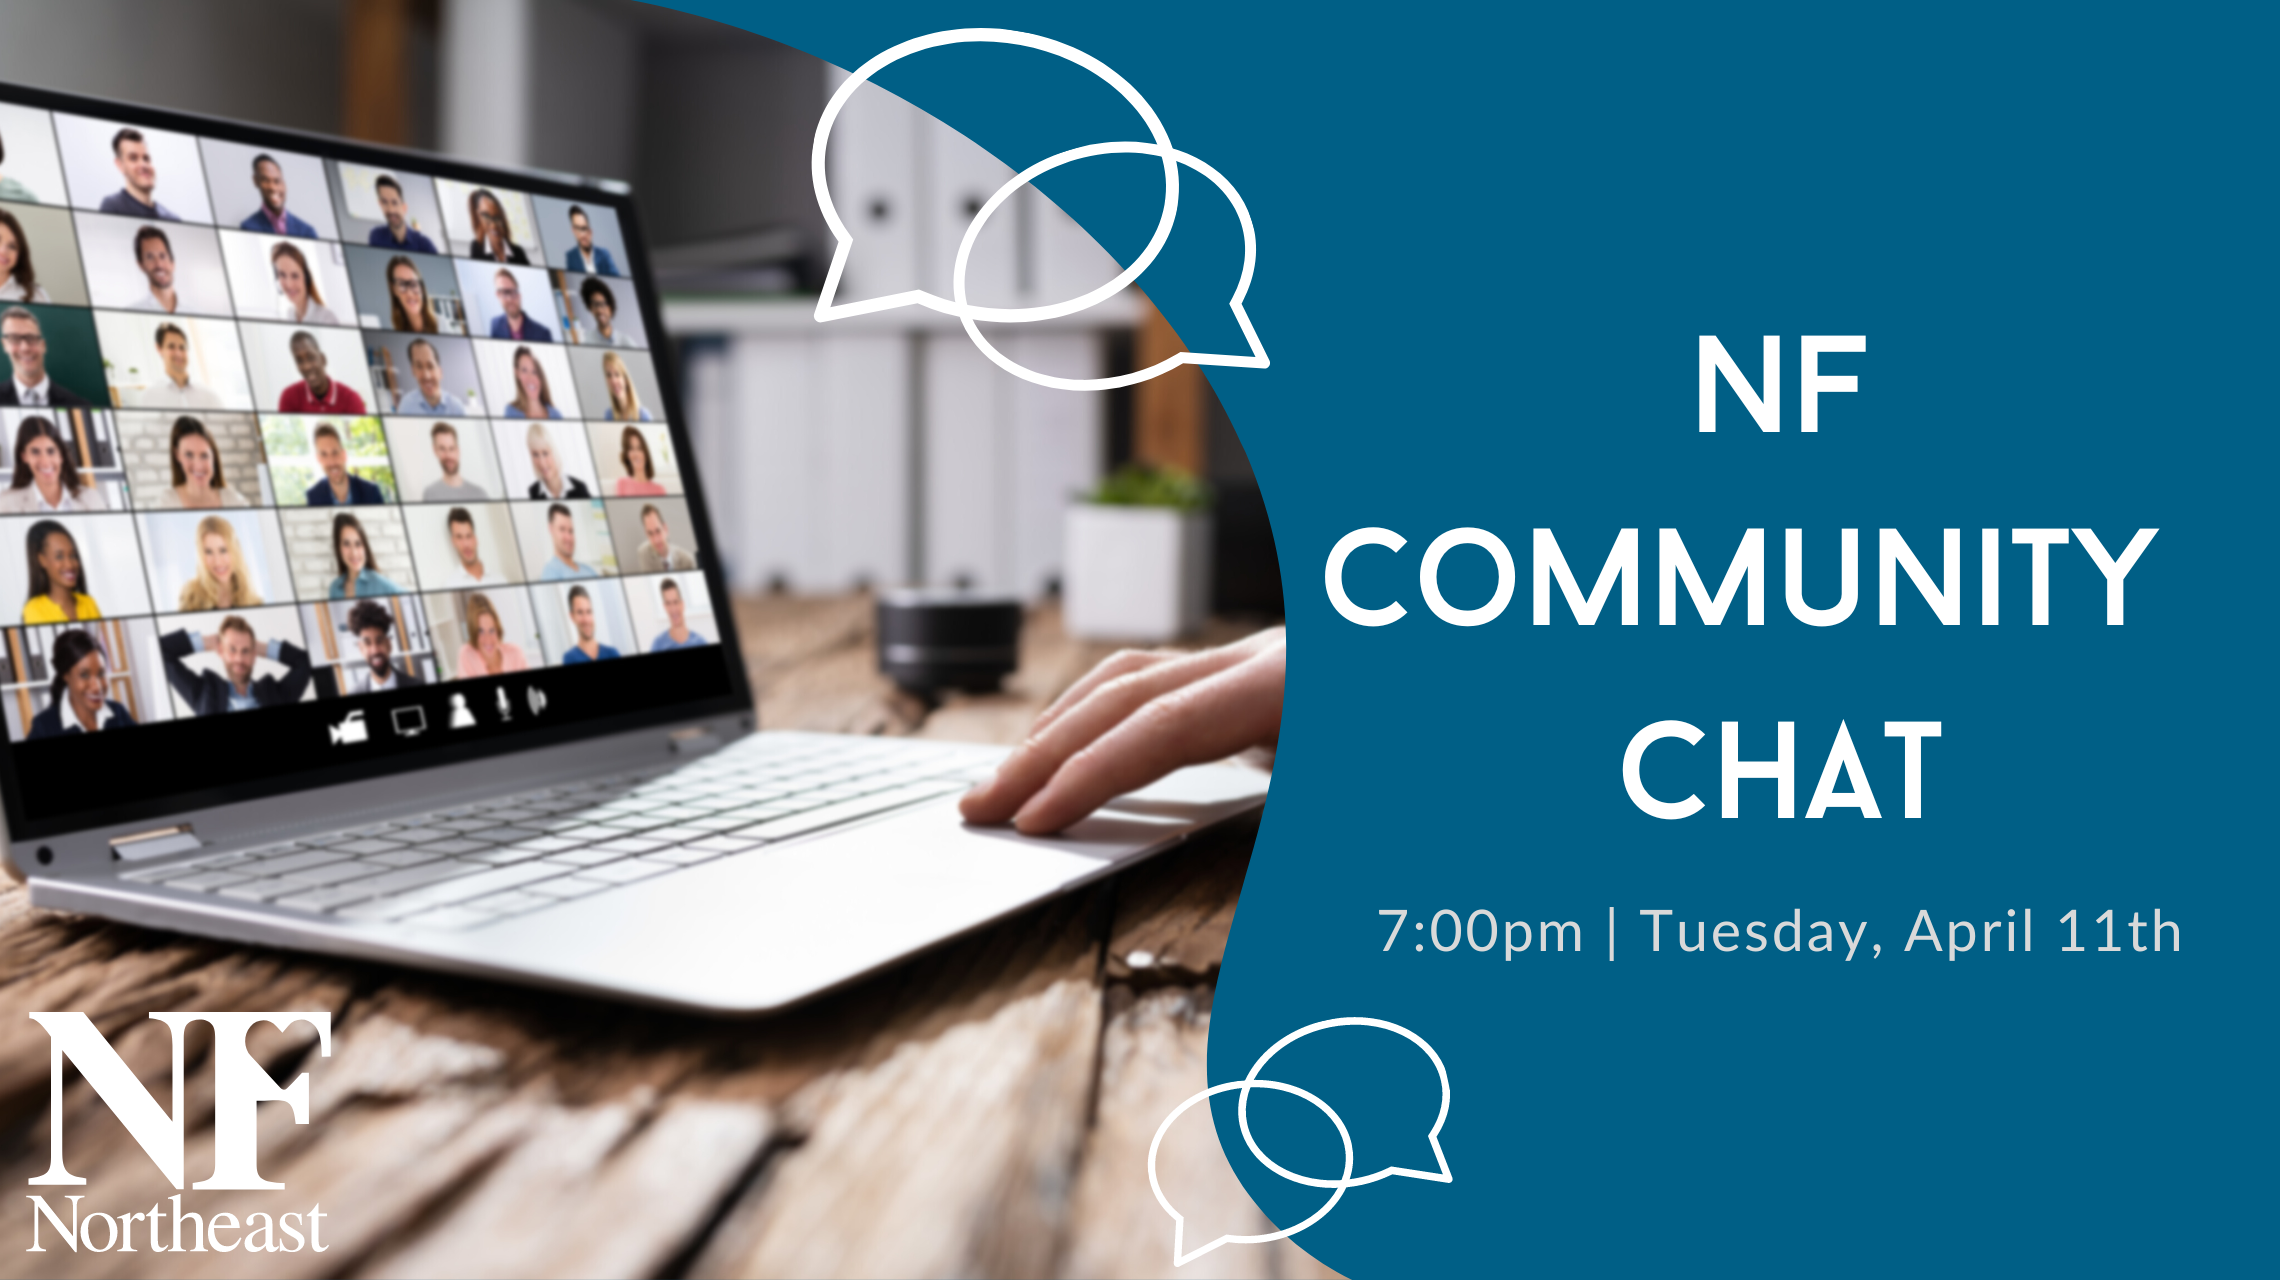 NF Community Chat event banner